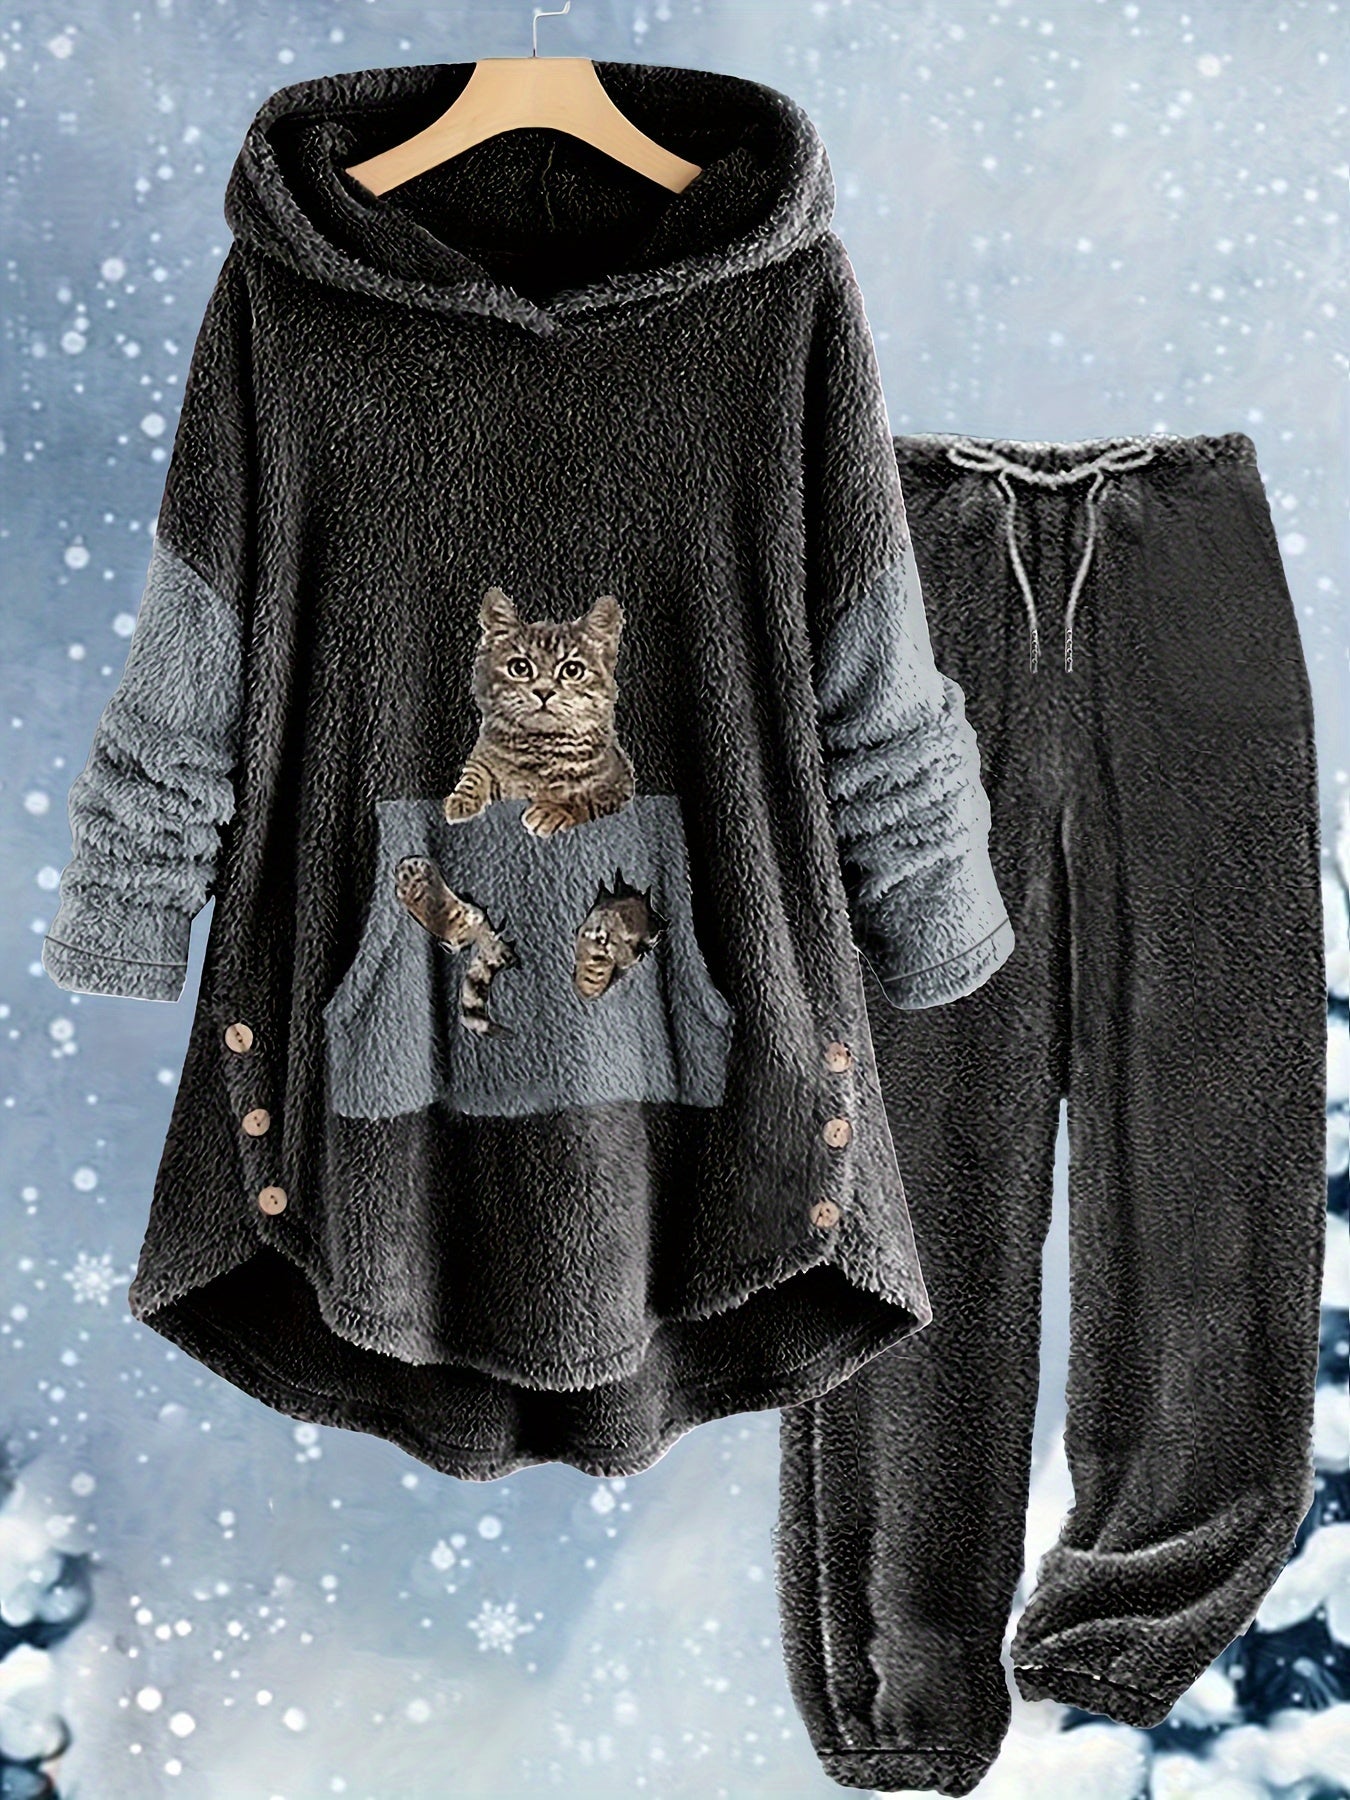 A two-piece cozy loungewear set with cartoon cat designs on the top's front pocket. The set includes a hooded top with buttons and matching pants, both in soft, plush polyester material. The background is snowy. This is the Plus Size Casual Outfits Two Piece Set, Women's Plus Cat Print Fleece Long Sleeve Button Decor Hoodie & Pants Outfits 2 Piece Set by Maramalive™.